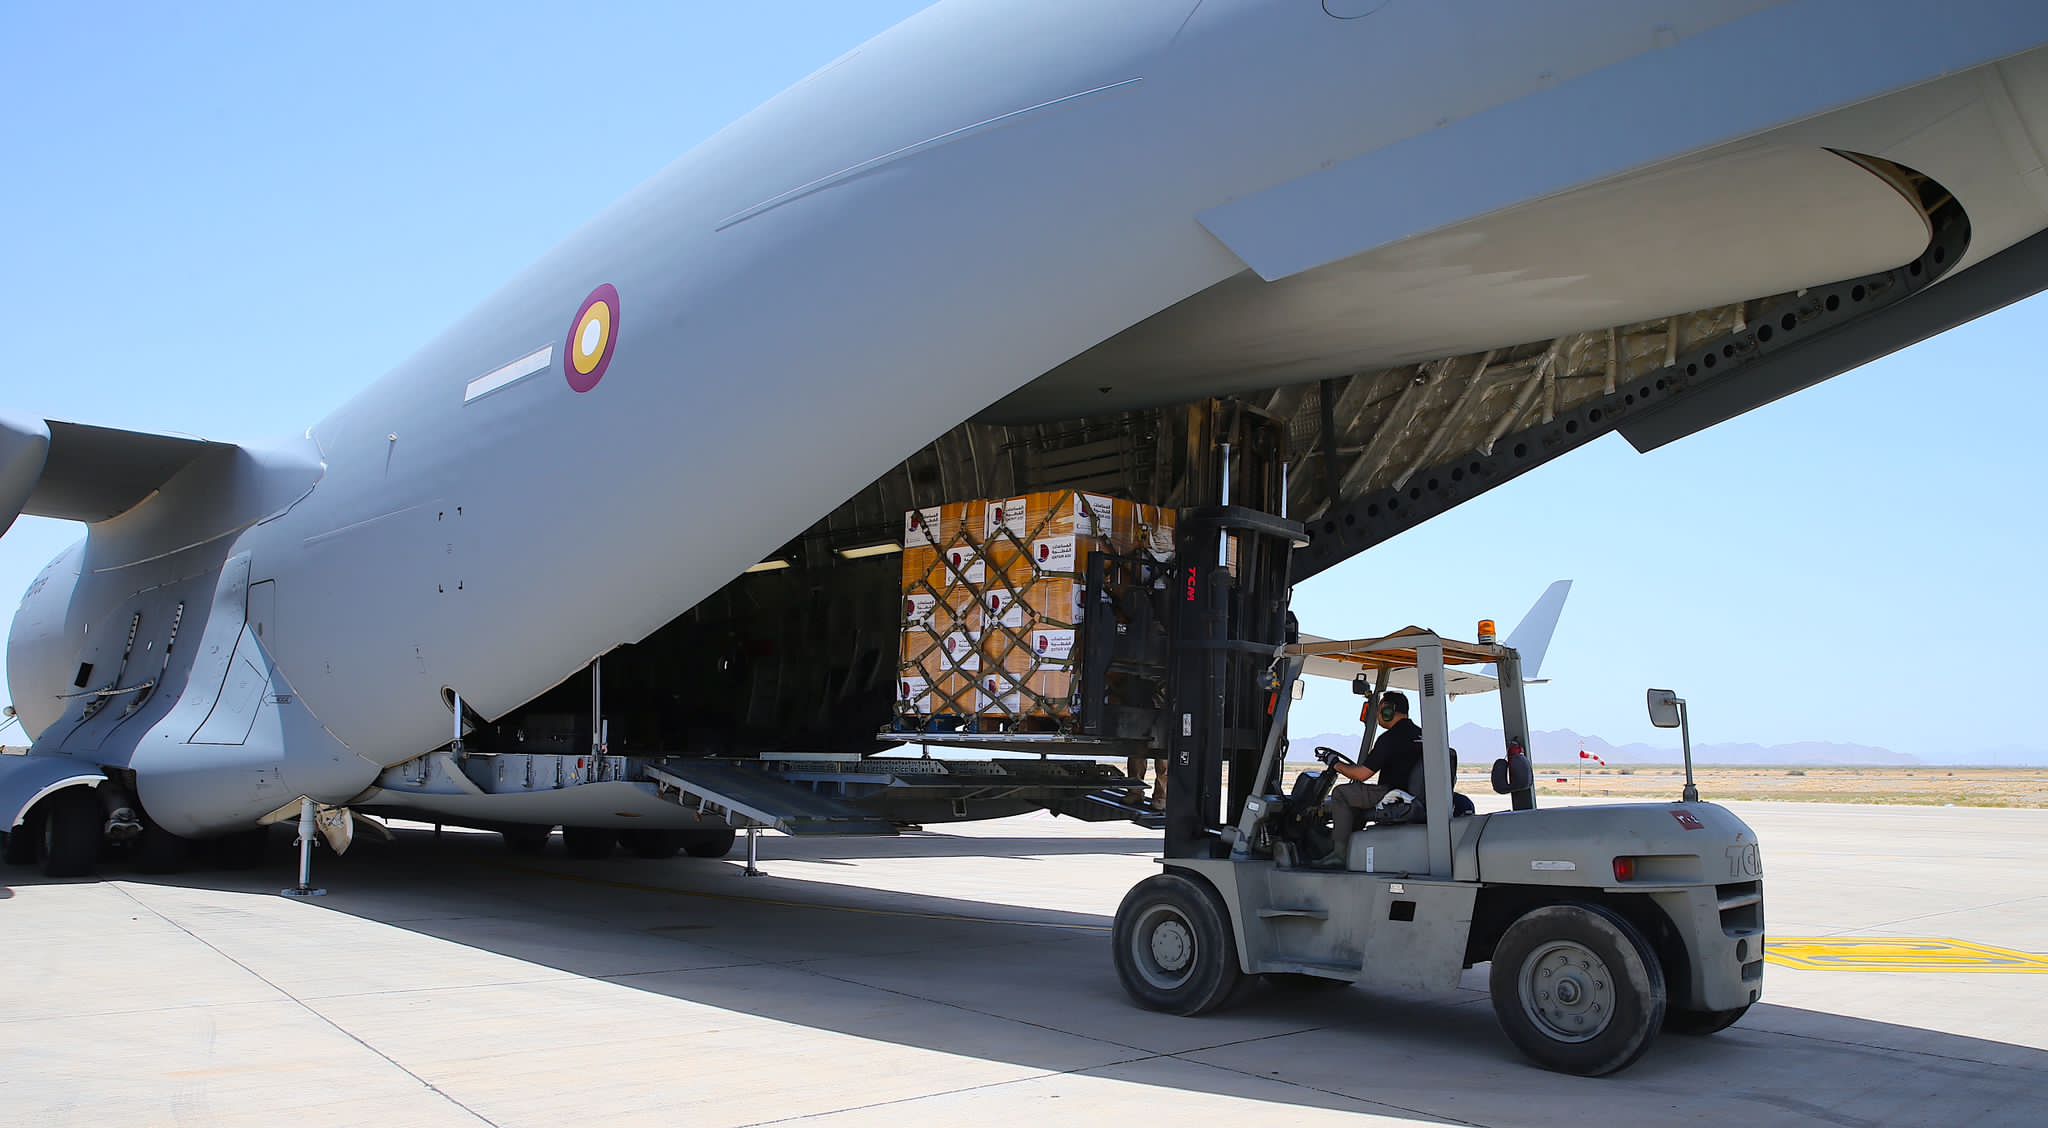 Qatari Airplane Carrying Food Assistance Arrives in Sudan, Evacuation of New Group